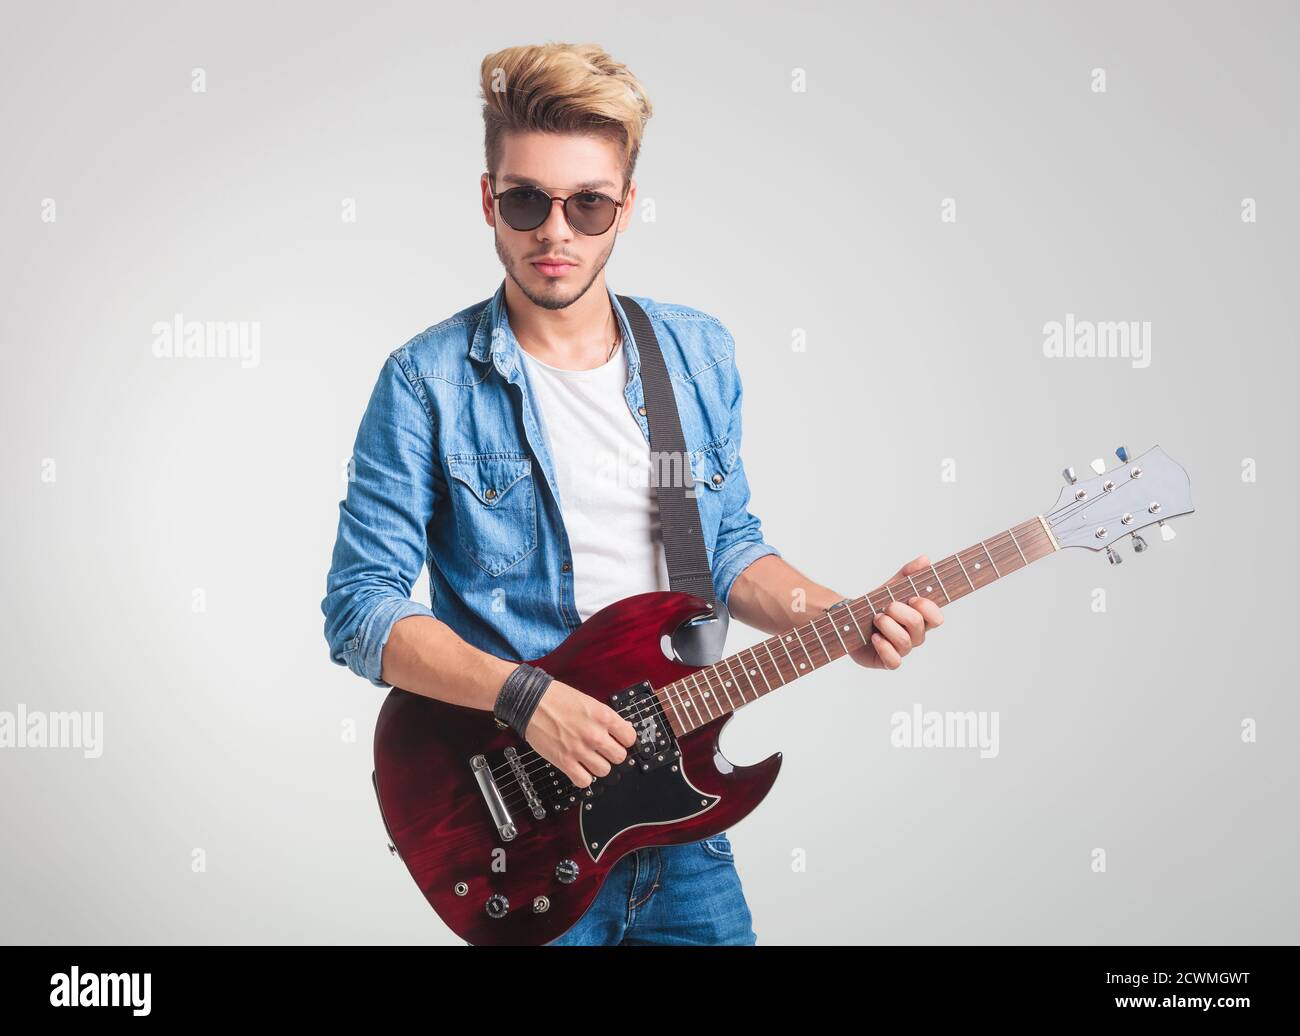 cool blonde guy playing electric guitar while posing for the camera in studio background Stock Photo